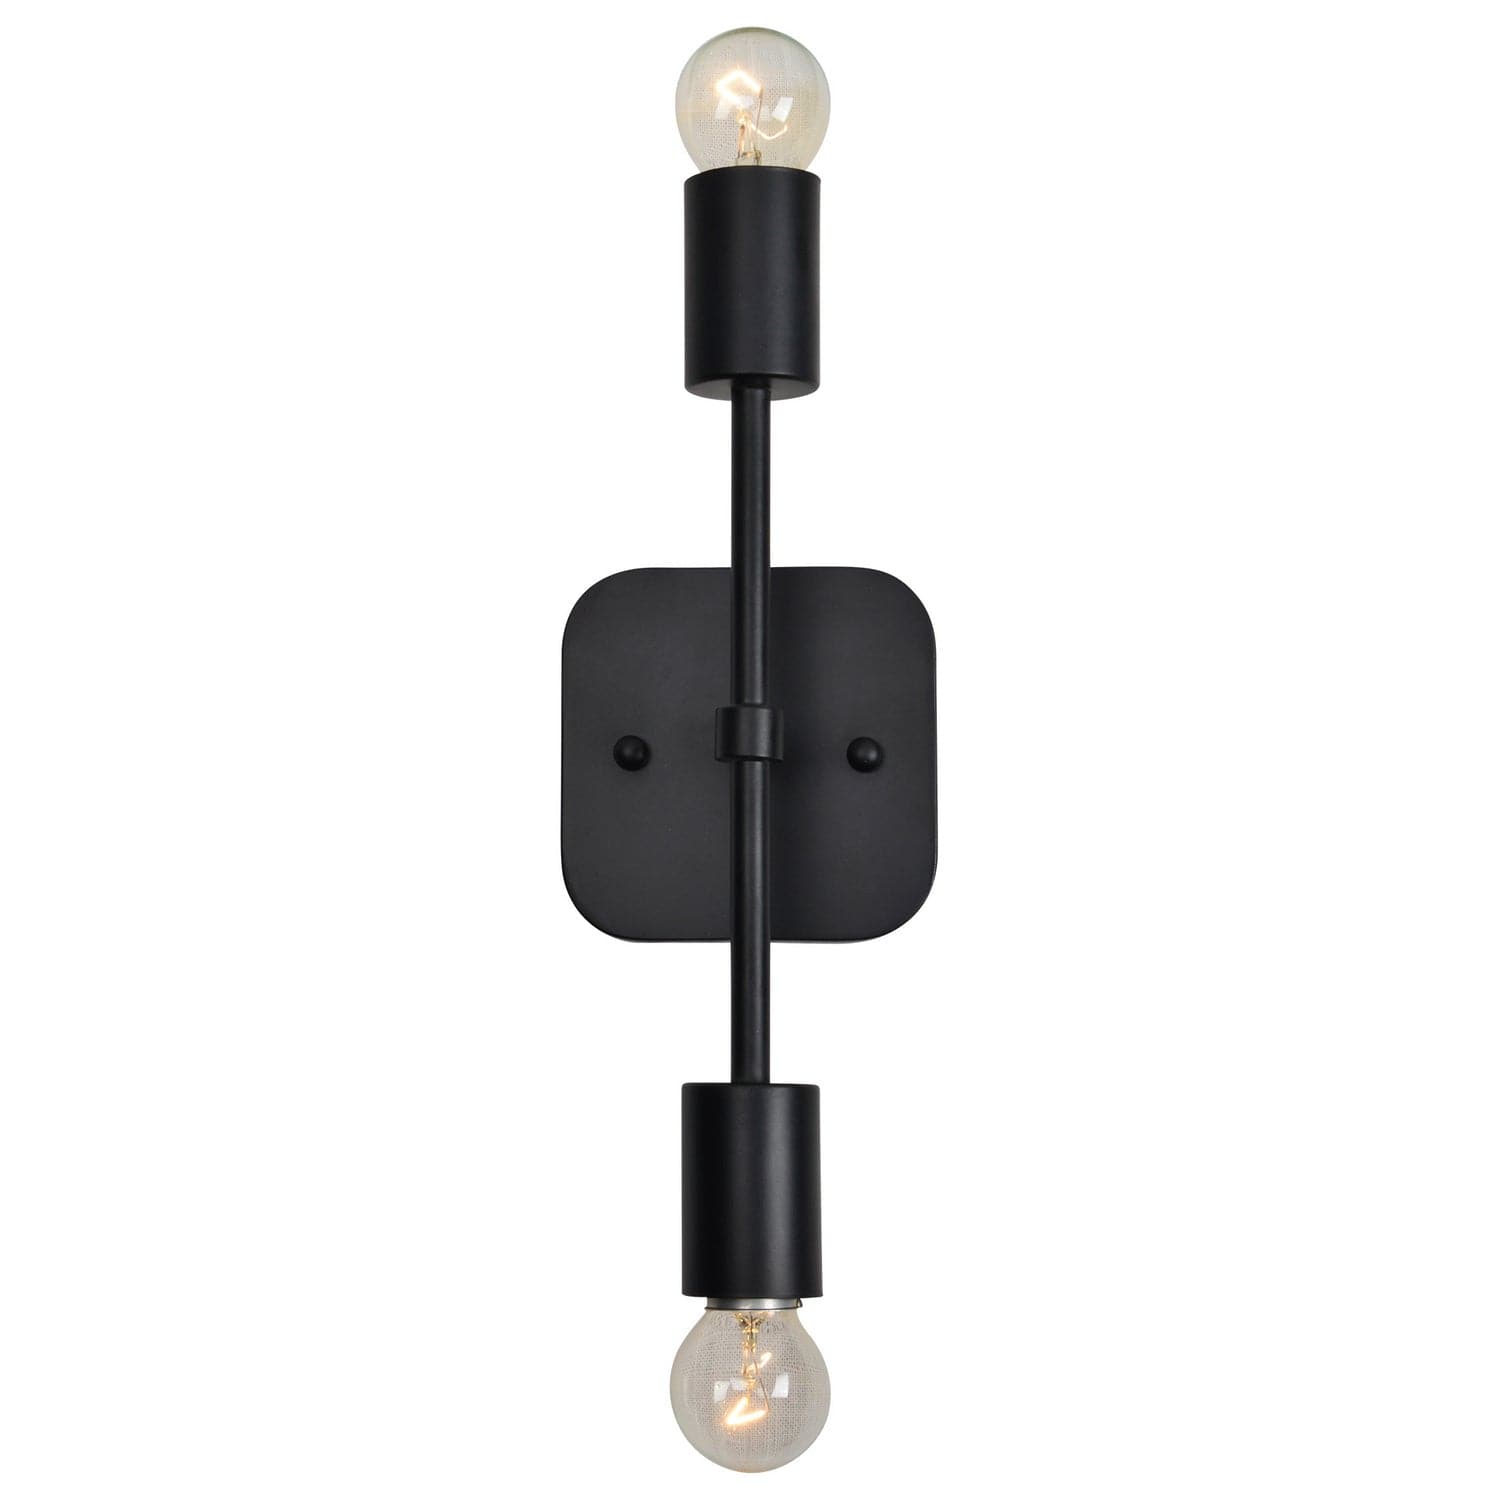 Renwil - WS008 - Two Light Wall Sconce - Albany I - Matte Black